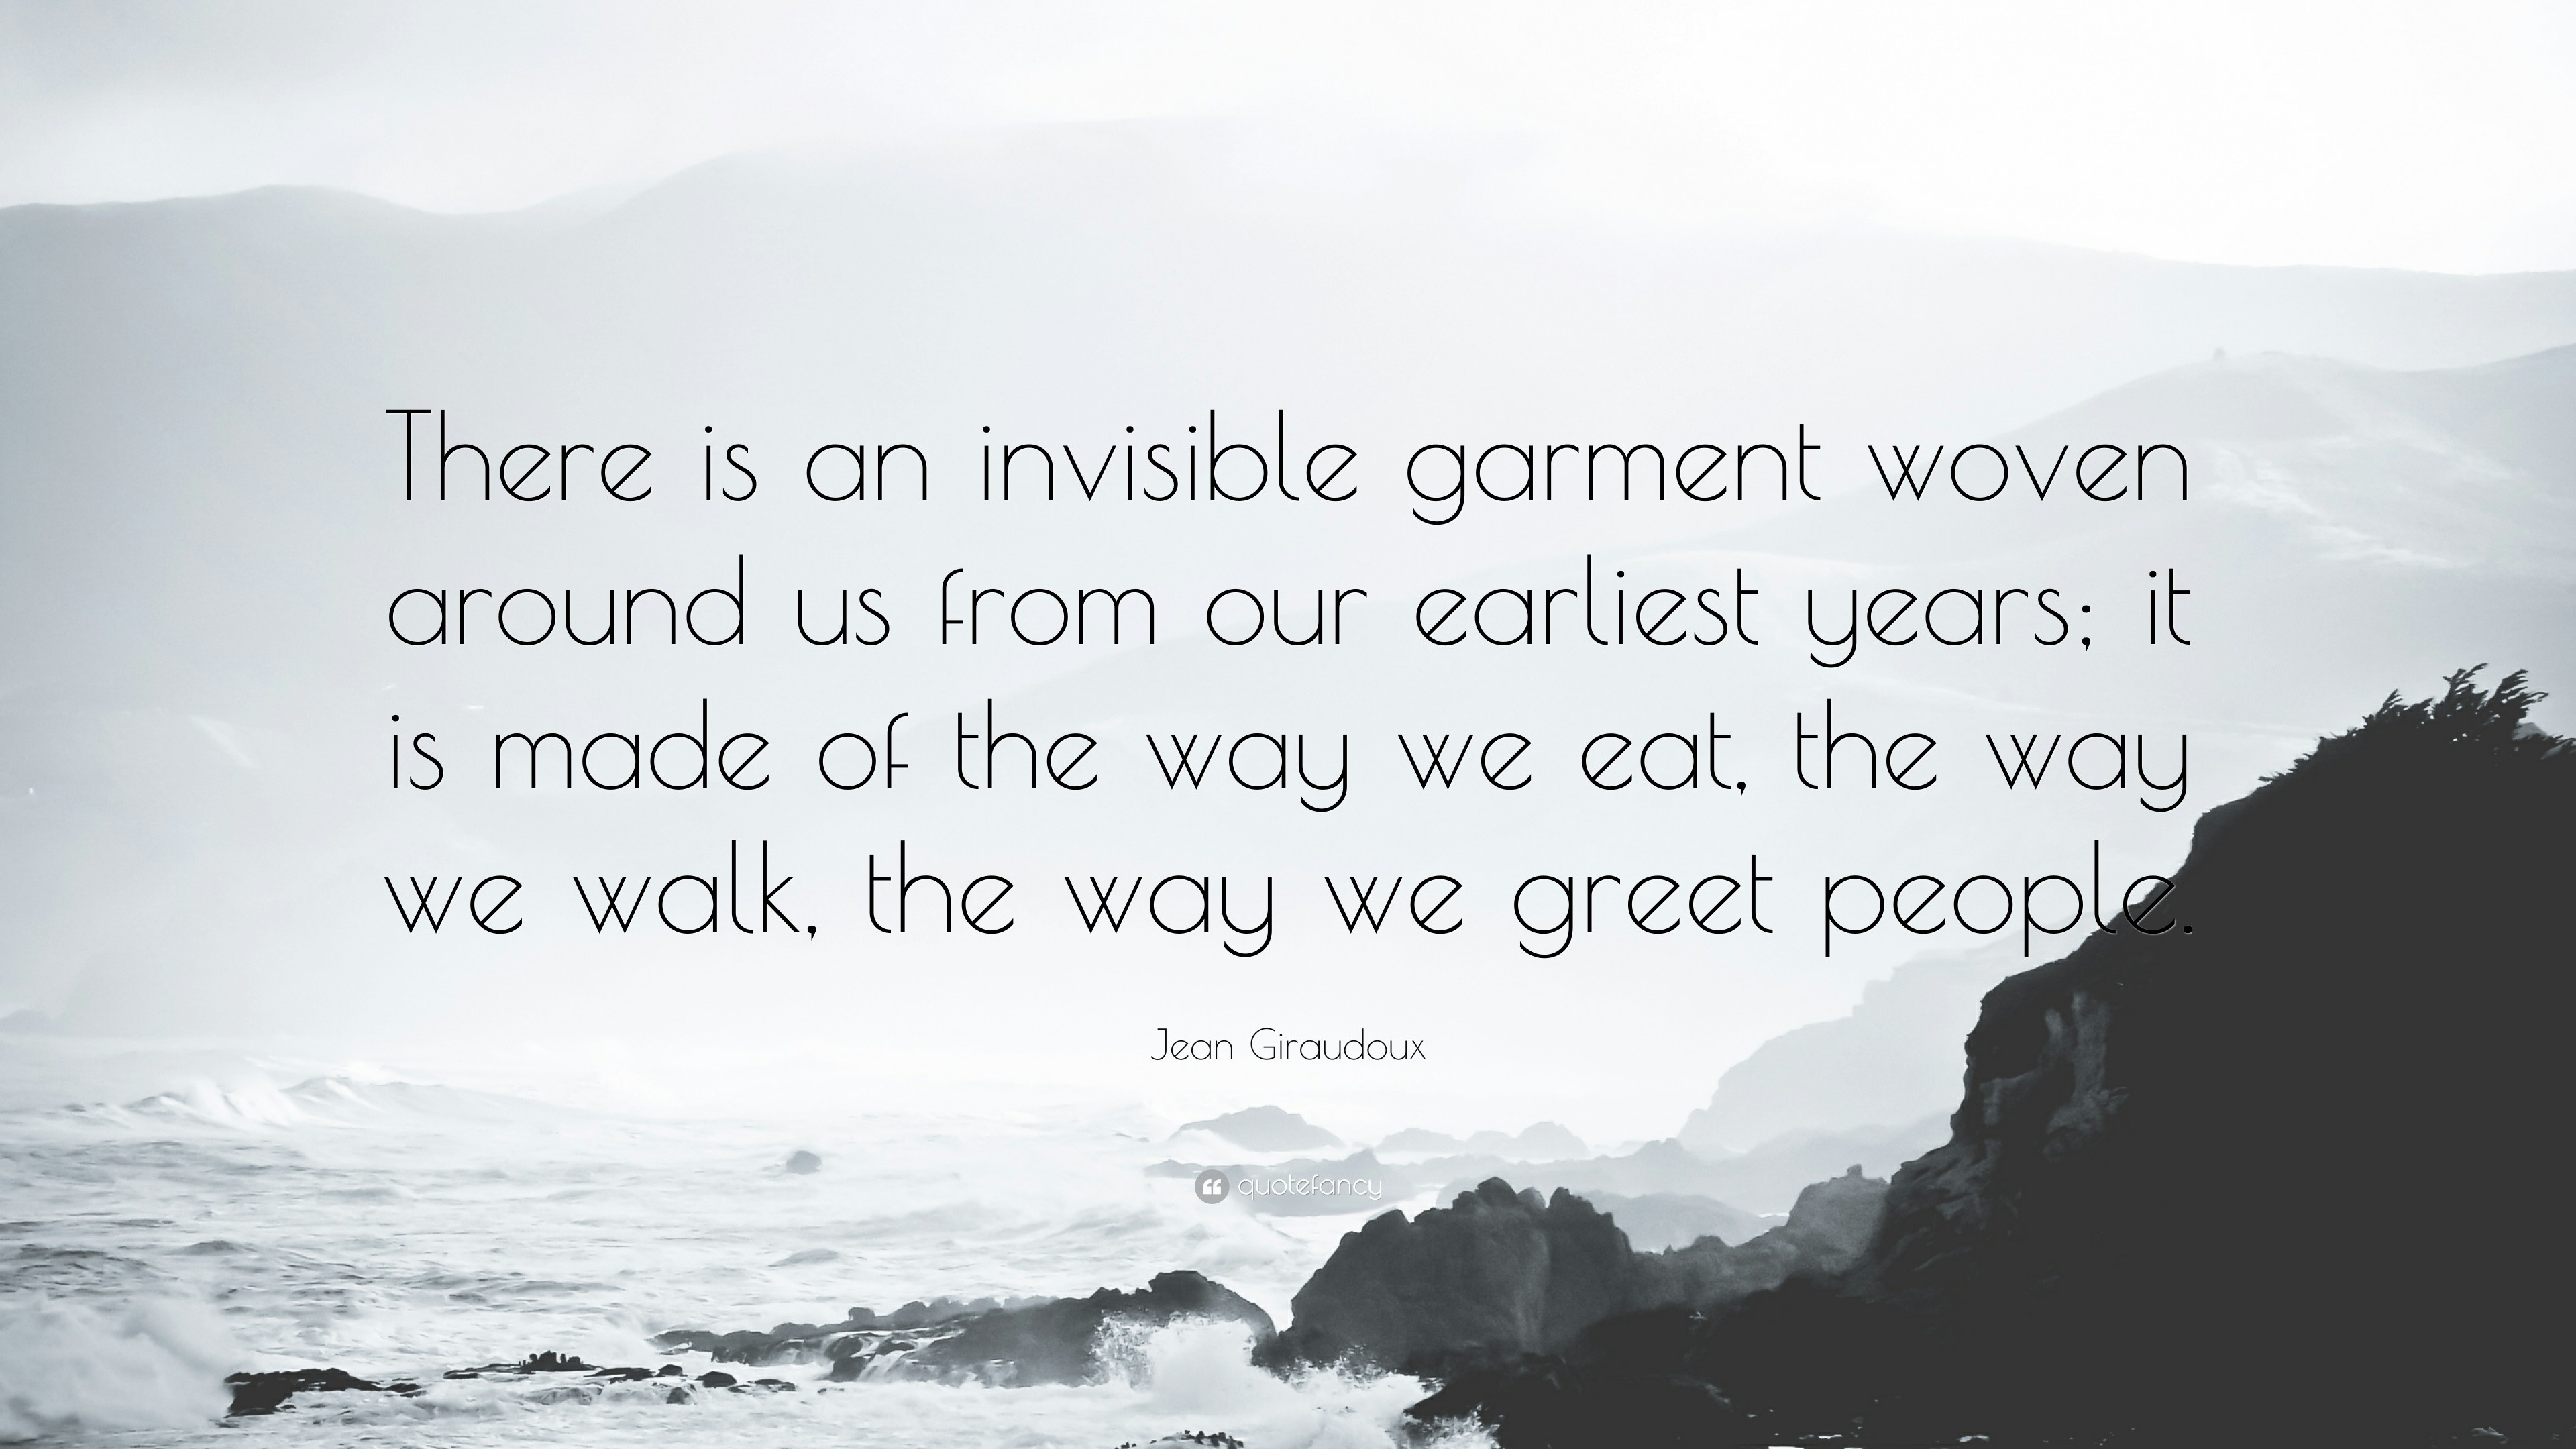 Jean Giraudoux Quote: “There is an invisible garment woven around